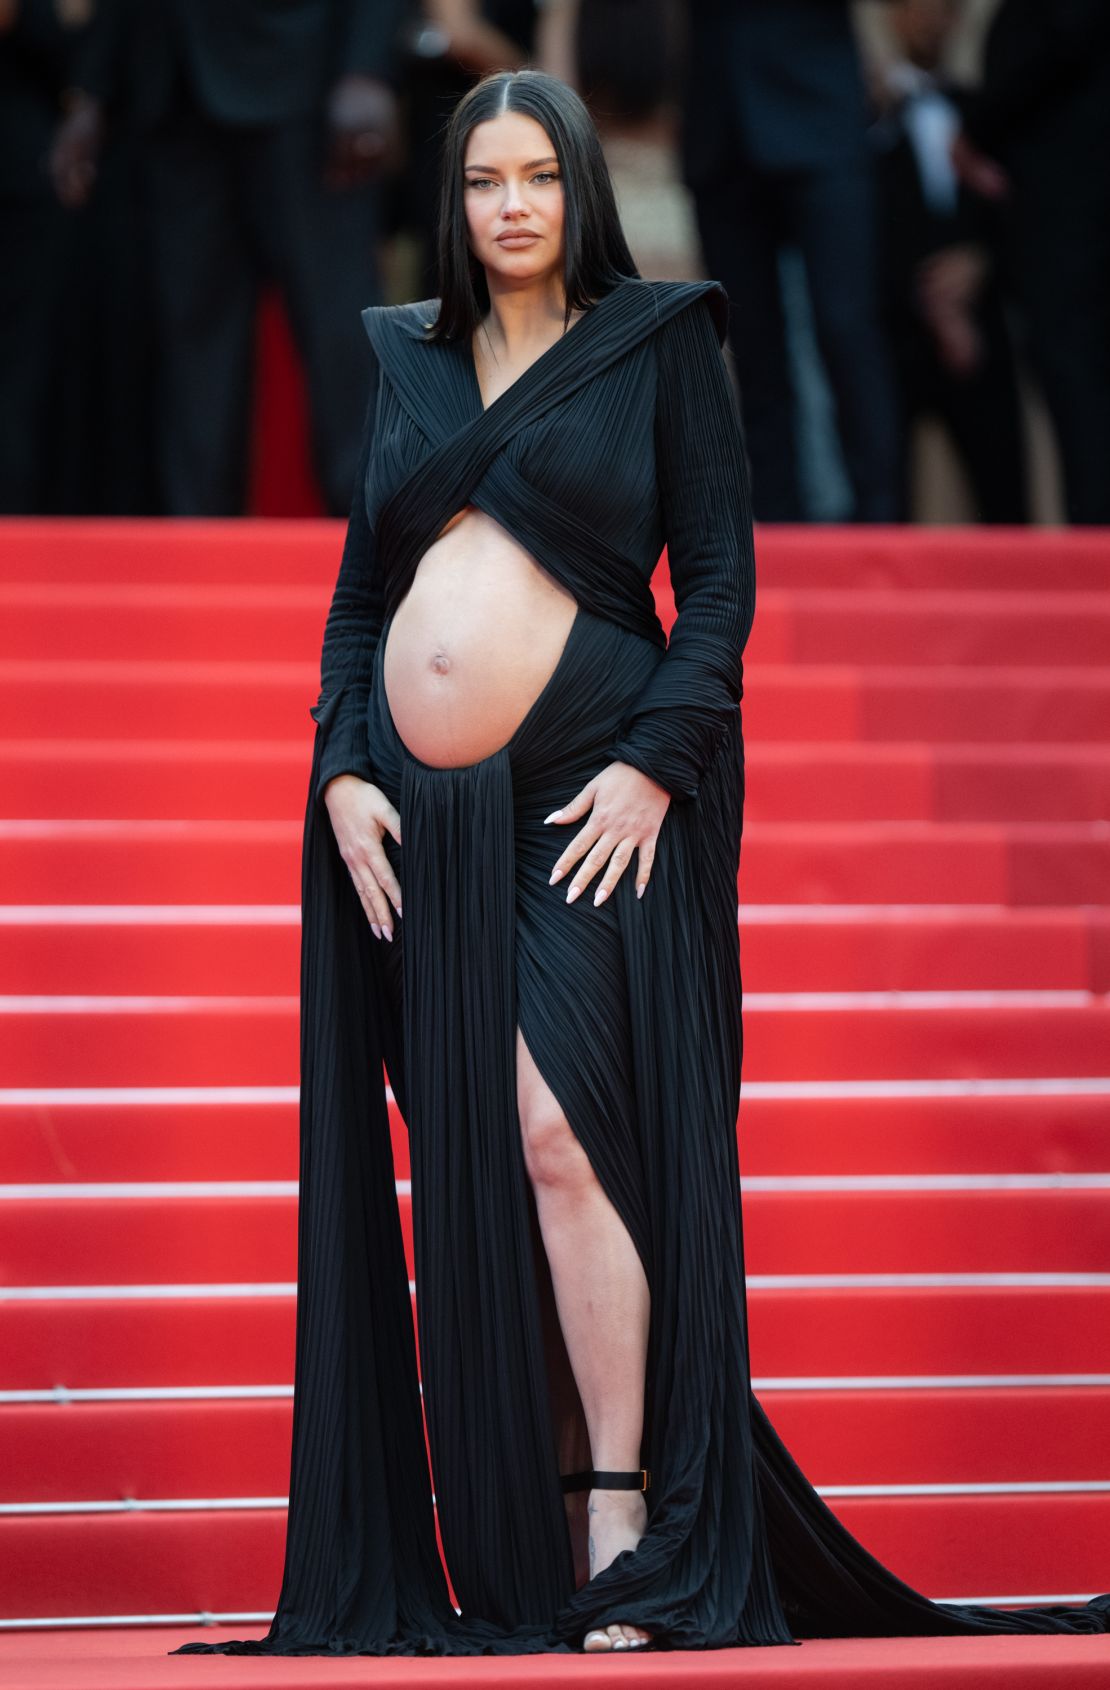 Lima's striking Cannes look challenged the traditional expectations of maternity fashion.